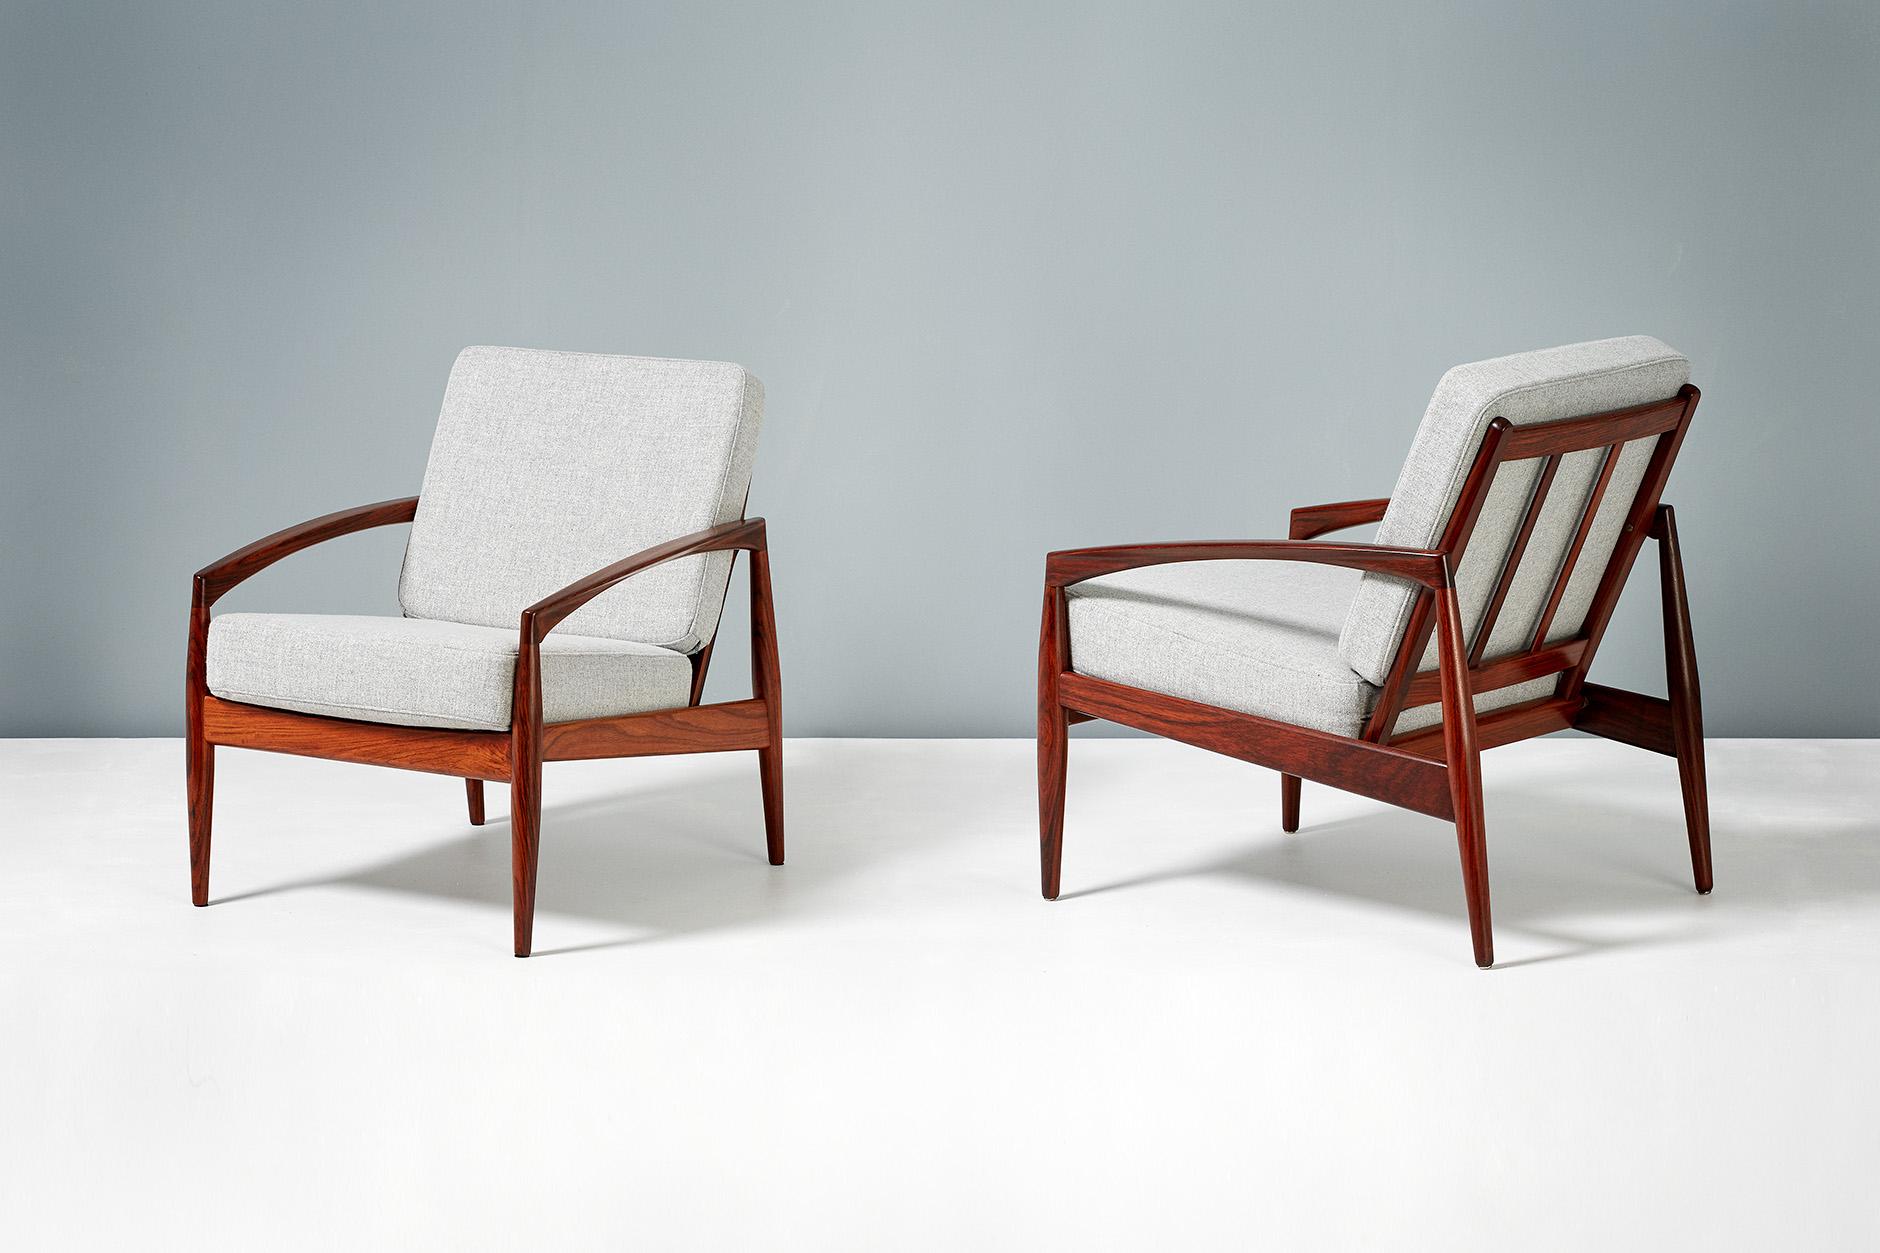 Kai Kristiansen

Pair of paper knife model lounge chairs, 1955.

Produced by Magnus Olesen, Denmark in rosewood. New cushions upholstered in soft grey wool fabric. 

     

  